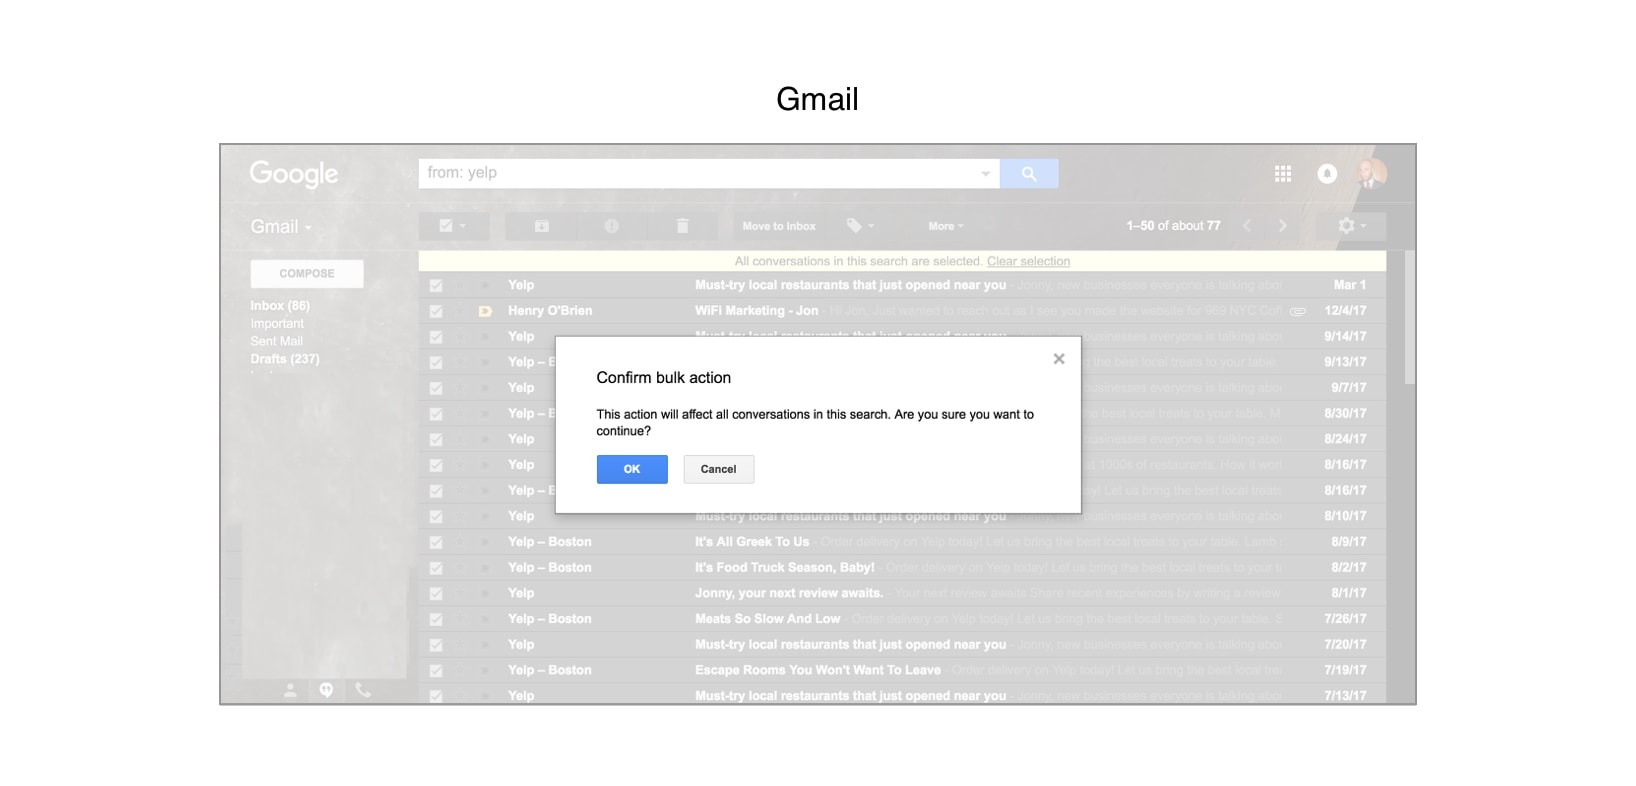 A screenshot of Gmail email client and its "confirm bulk action" button